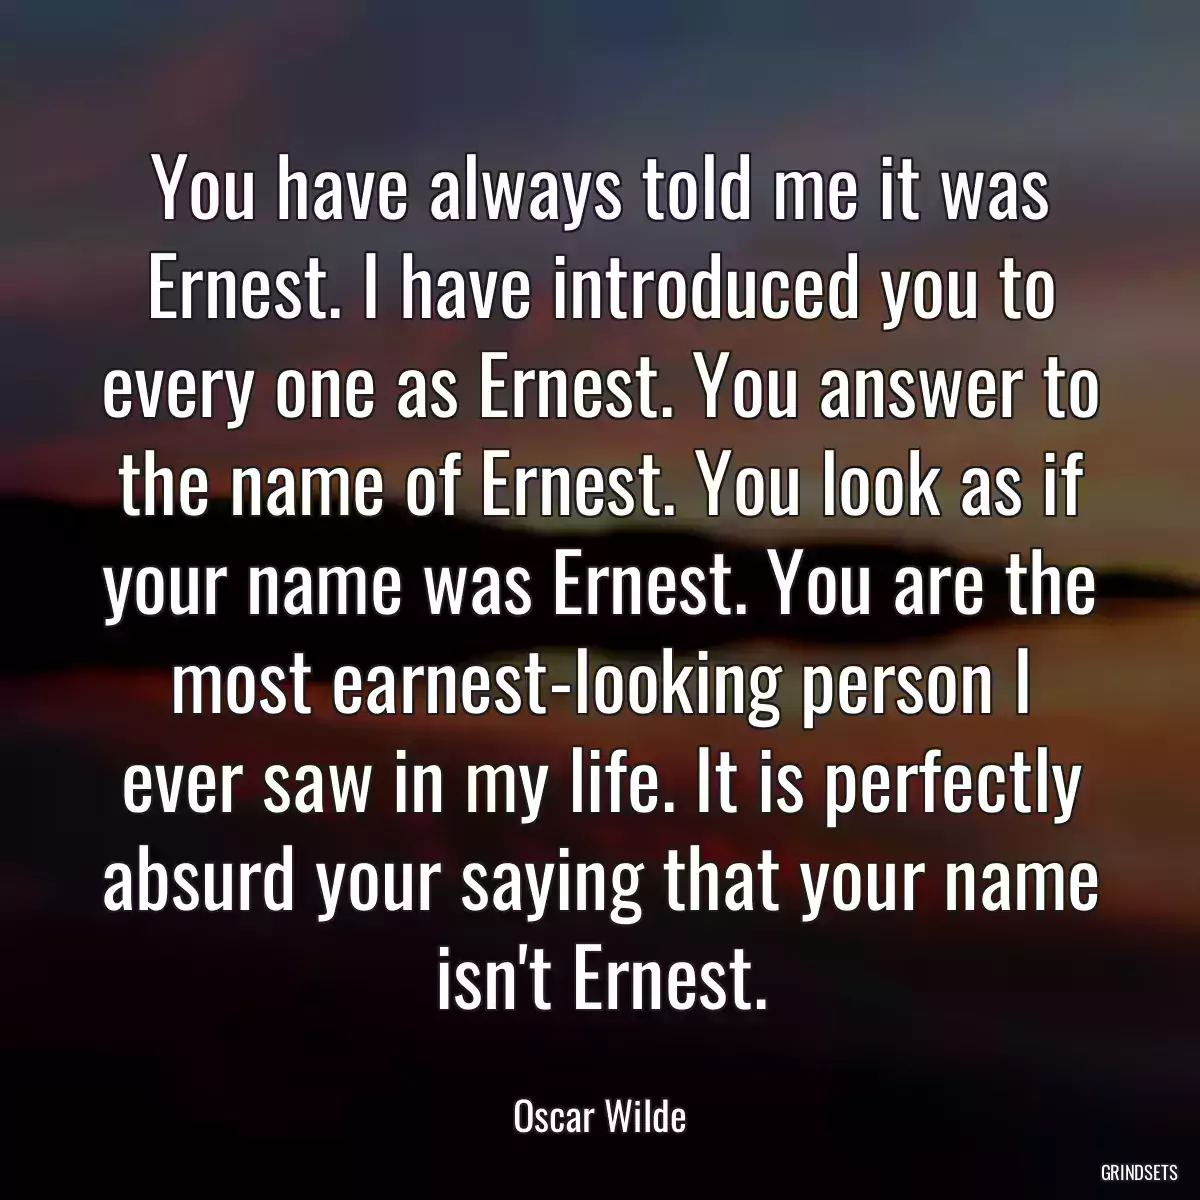 You have always told me it was Ernest. I have introduced you to every one as Ernest. You answer to the name of Ernest. You look as if your name was Ernest. You are the most earnest-looking person I ever saw in my life. It is perfectly absurd your saying that your name isn\'t Ernest.